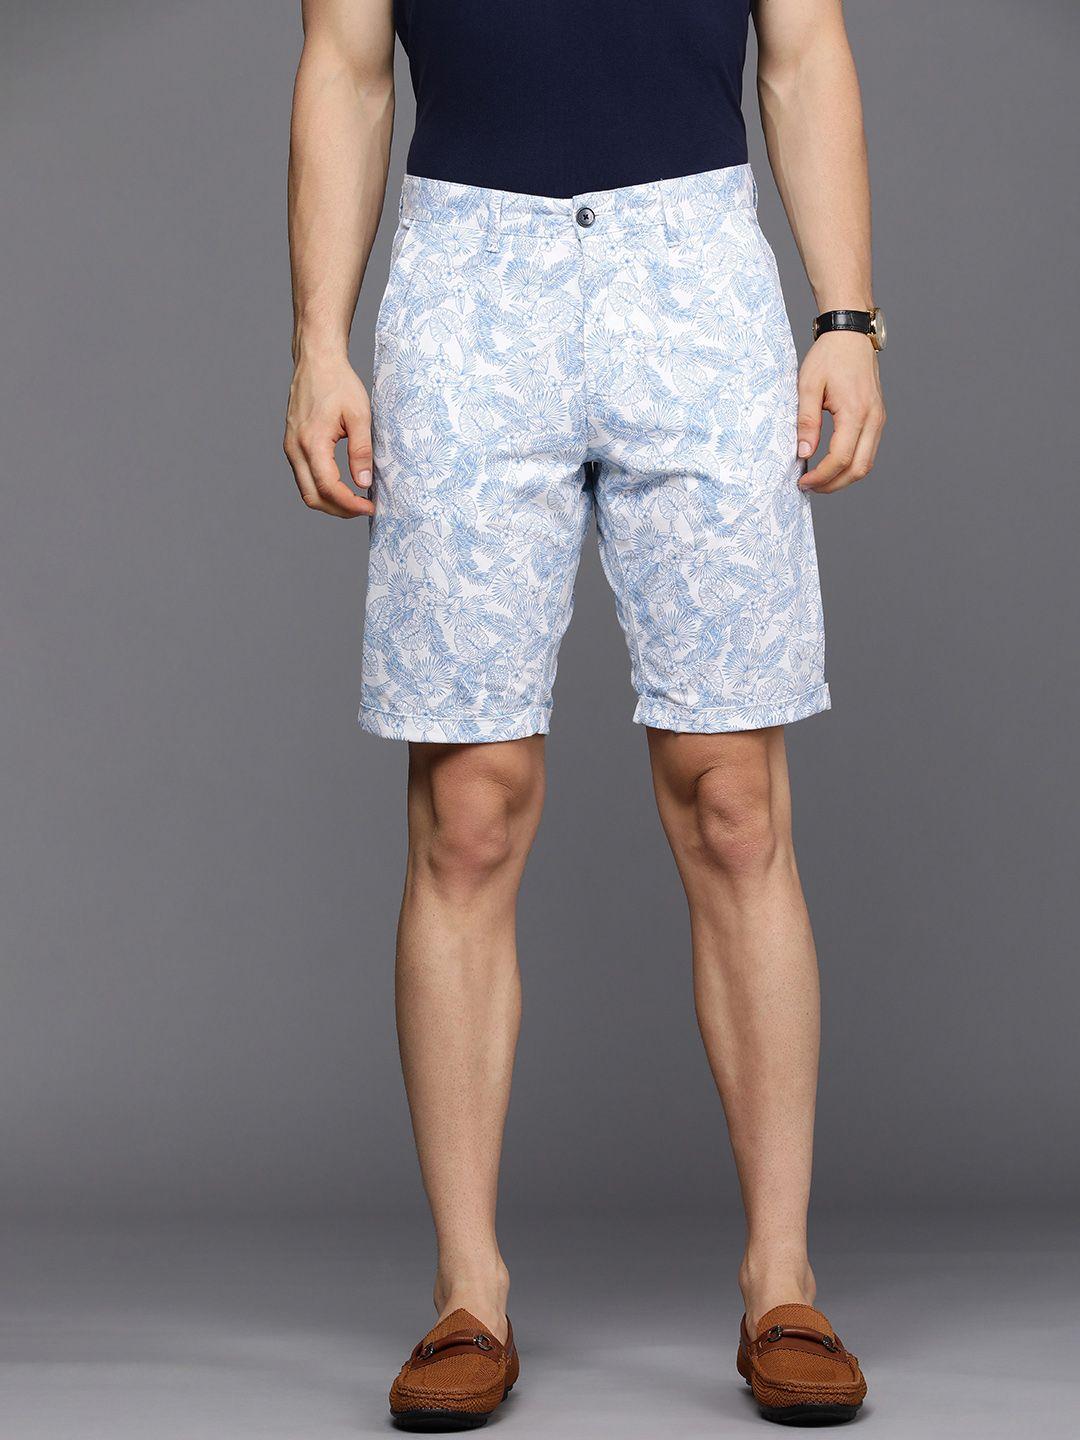 louis-philippe-sport-men-white-floral-printed-slim-fit-low-rise-chino-shorts